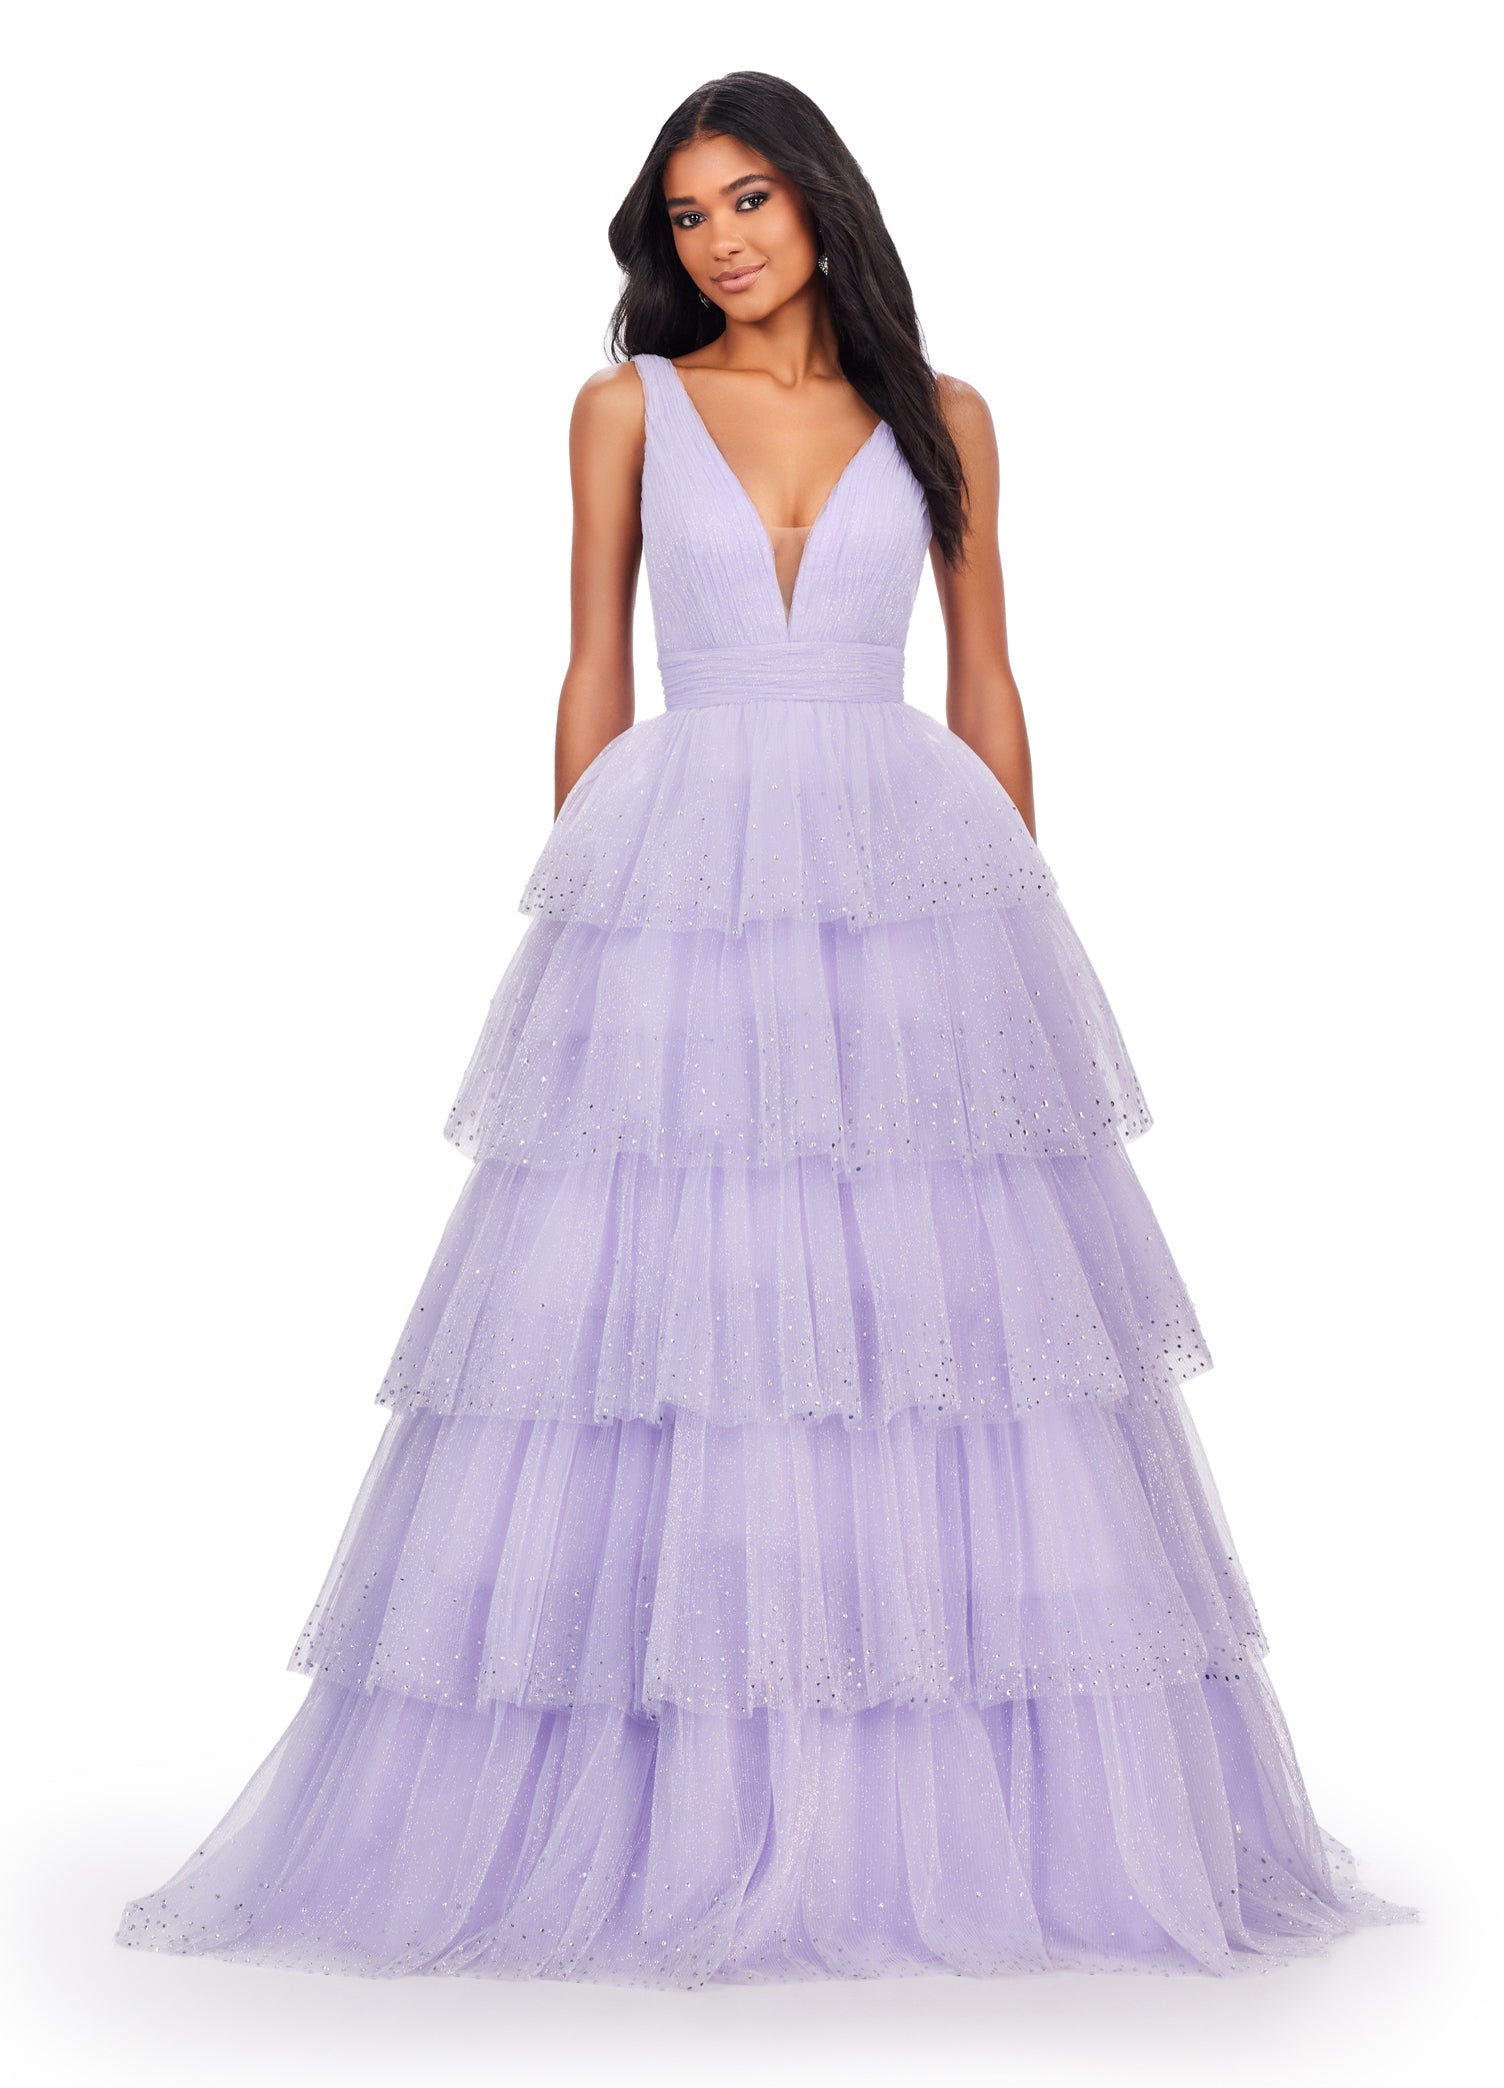 Lunss Scattering Feather Appliqued Purple Tulle Ball Gown Dress